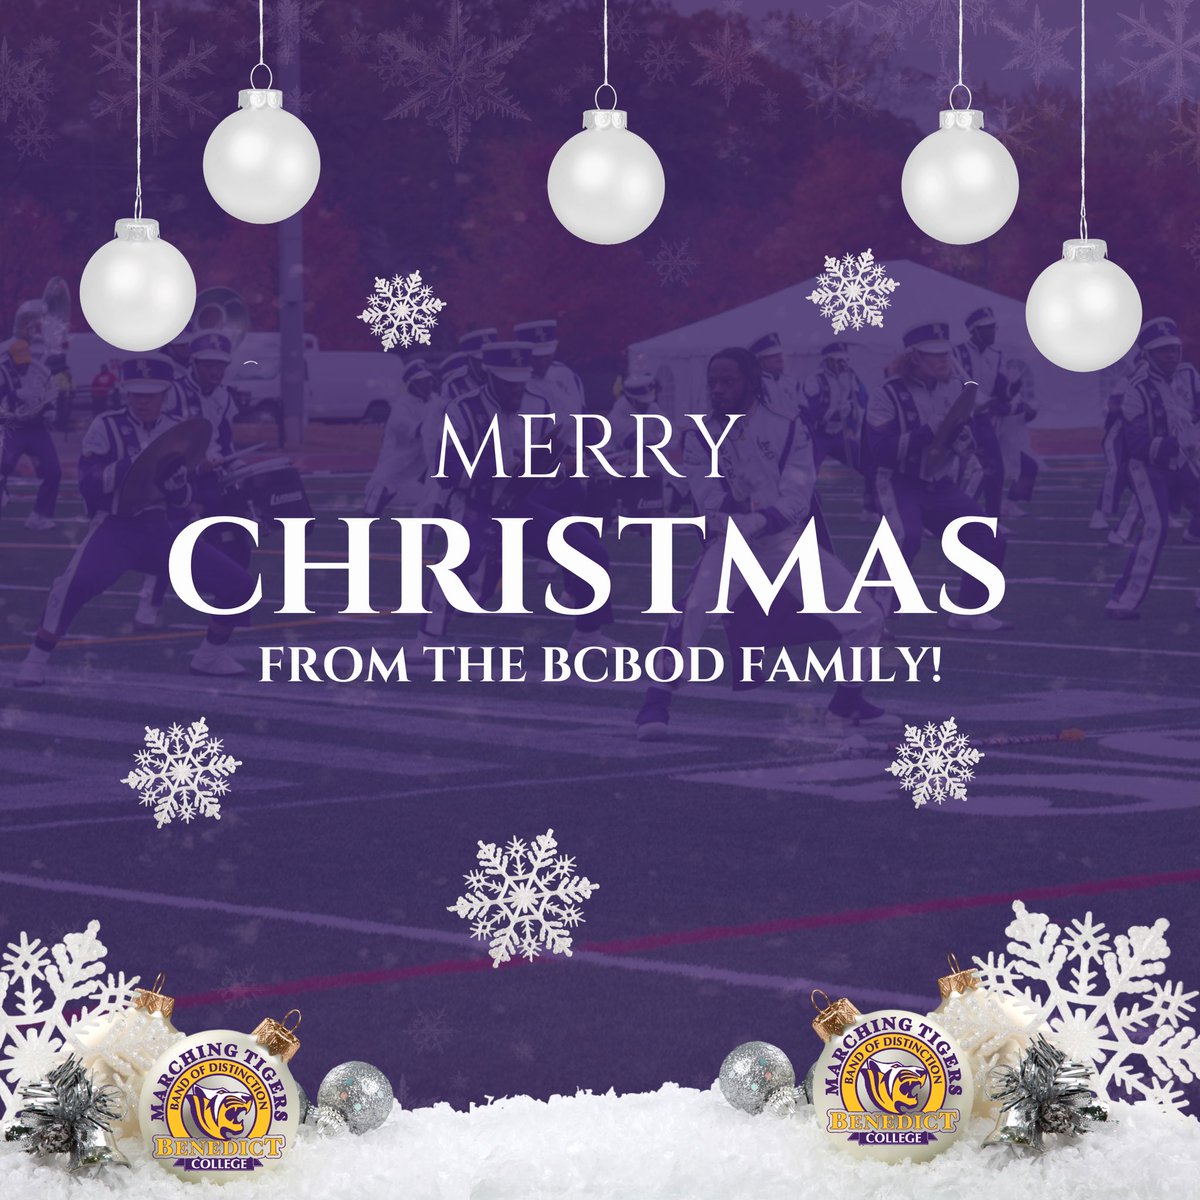 Benedict College Band of Distinction (@BC_BOD) on Twitter photo 2023-12-25 13:49:20